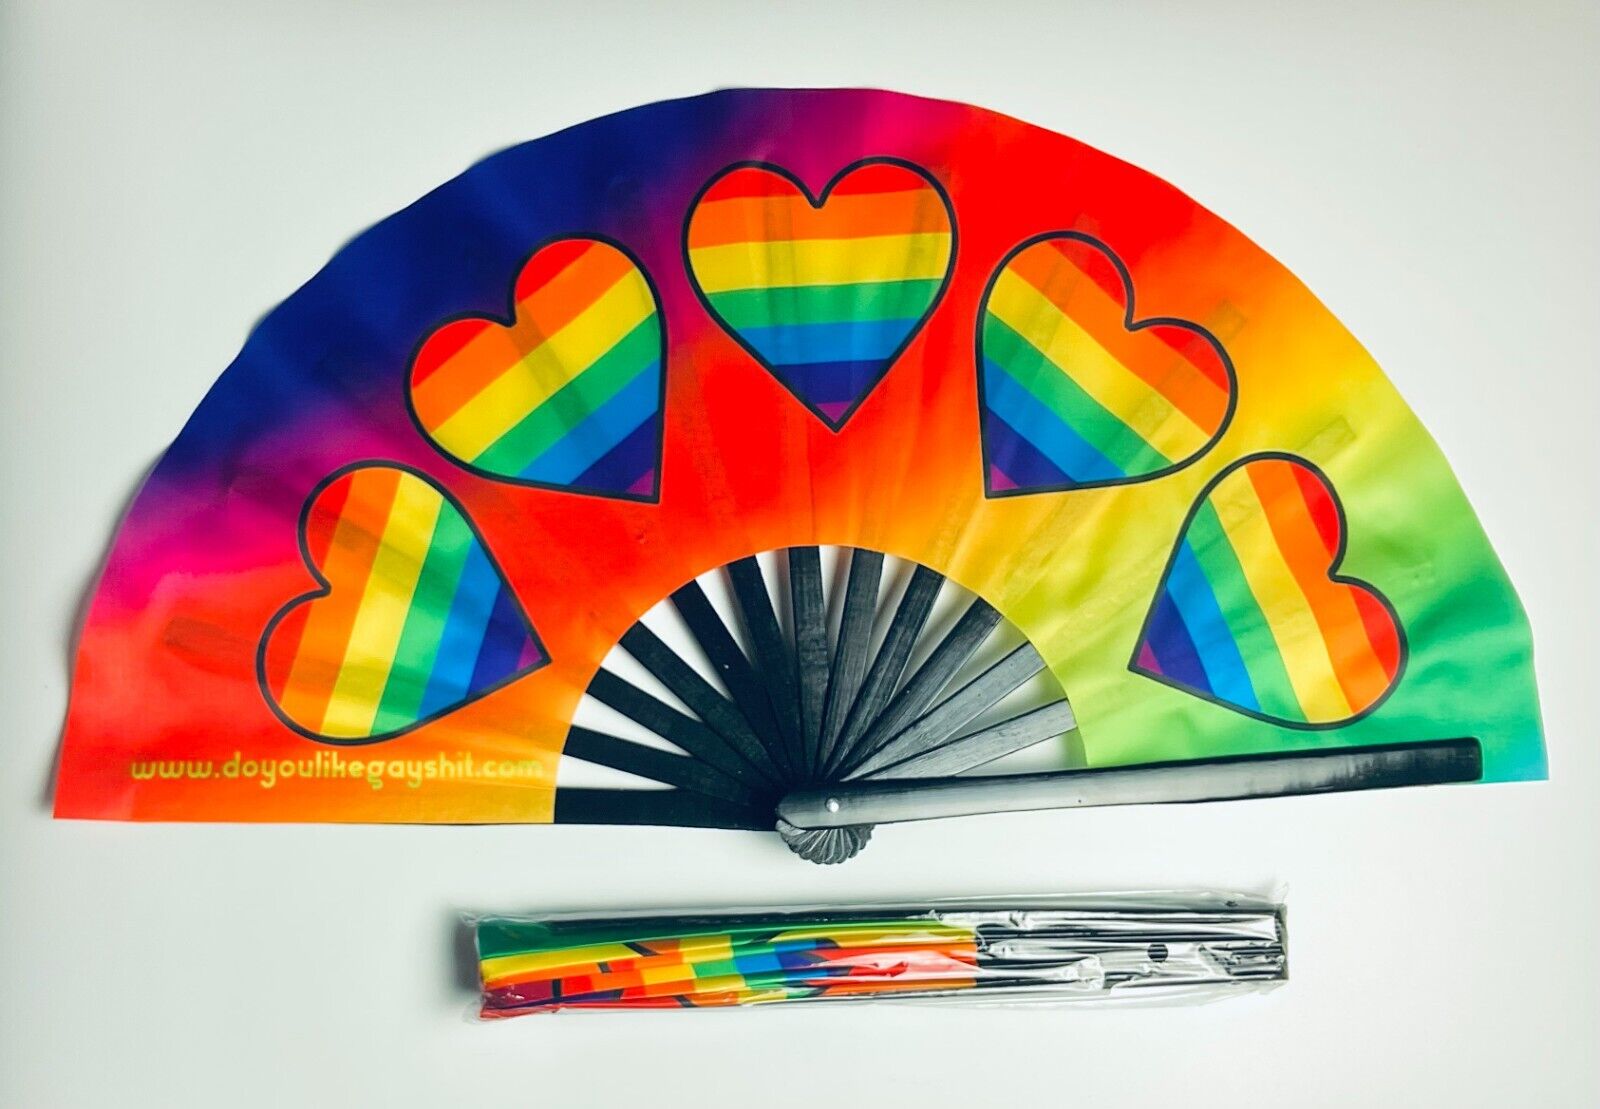 Vibrant Five Rainbow Hearts 26"  Extra Large Folding Clack Gay Pride Fan Rave Do You Like Gay Shit?